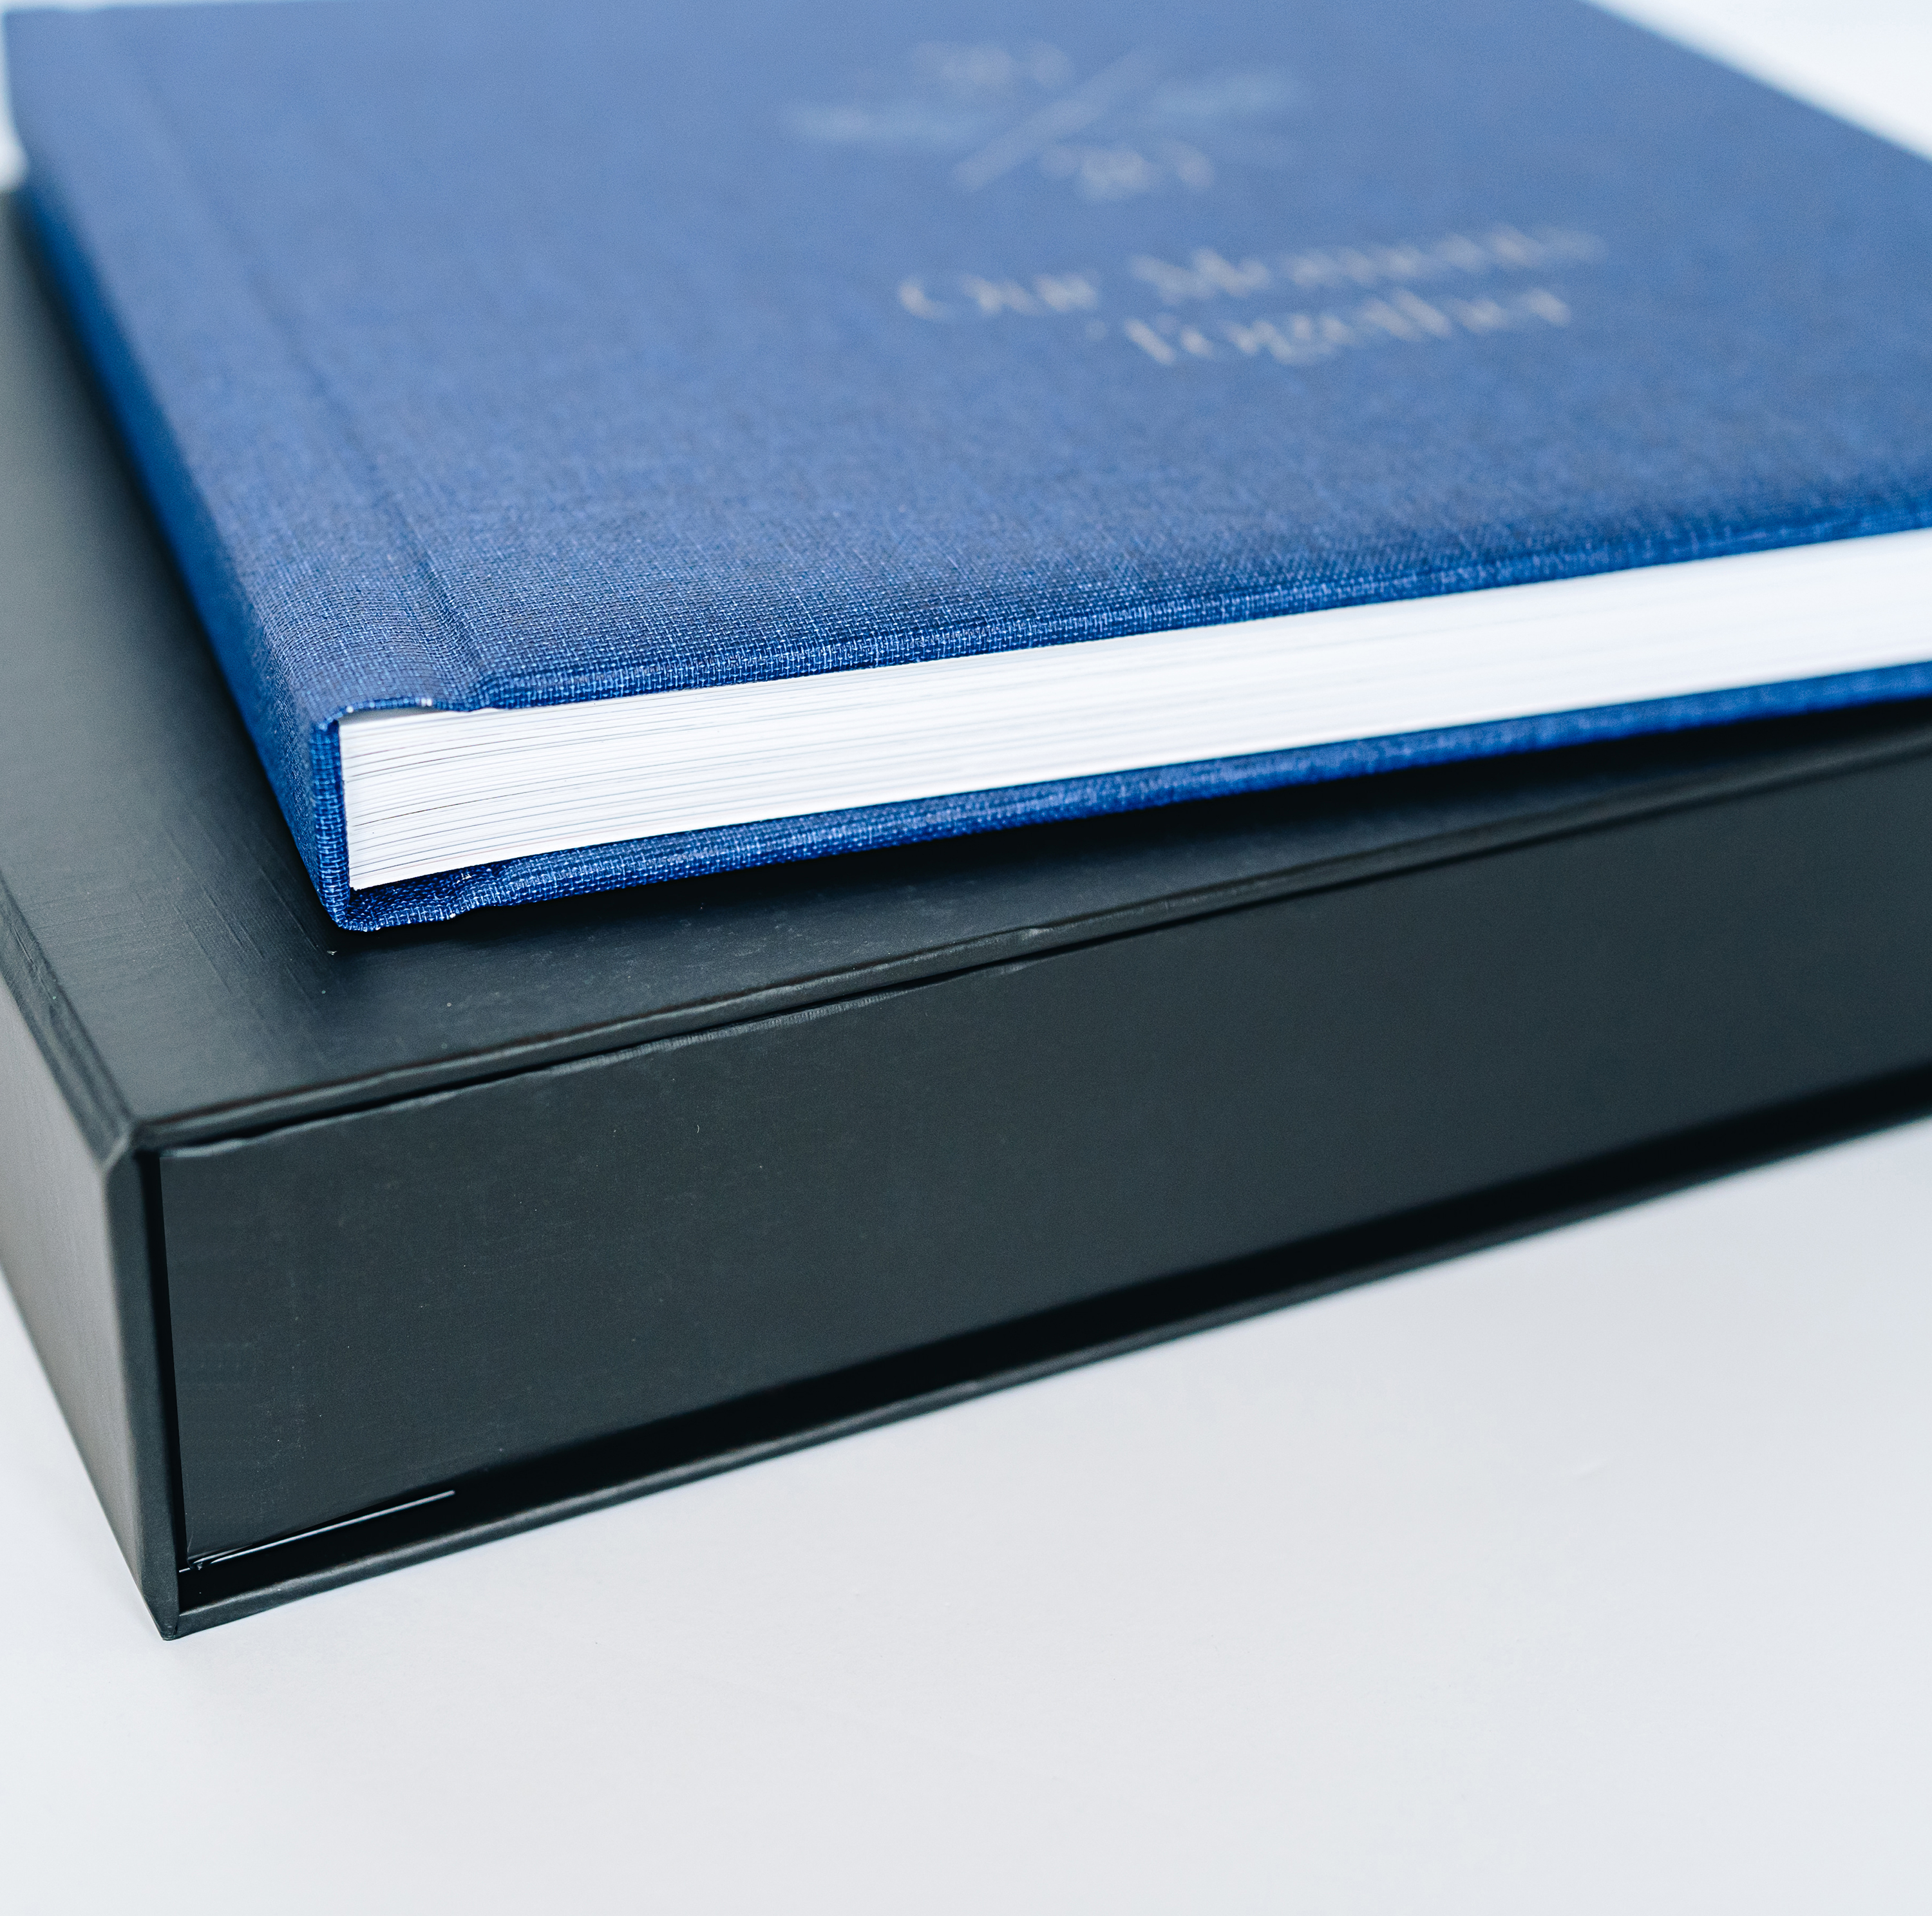 Photo book storage box with a blue linen photo book